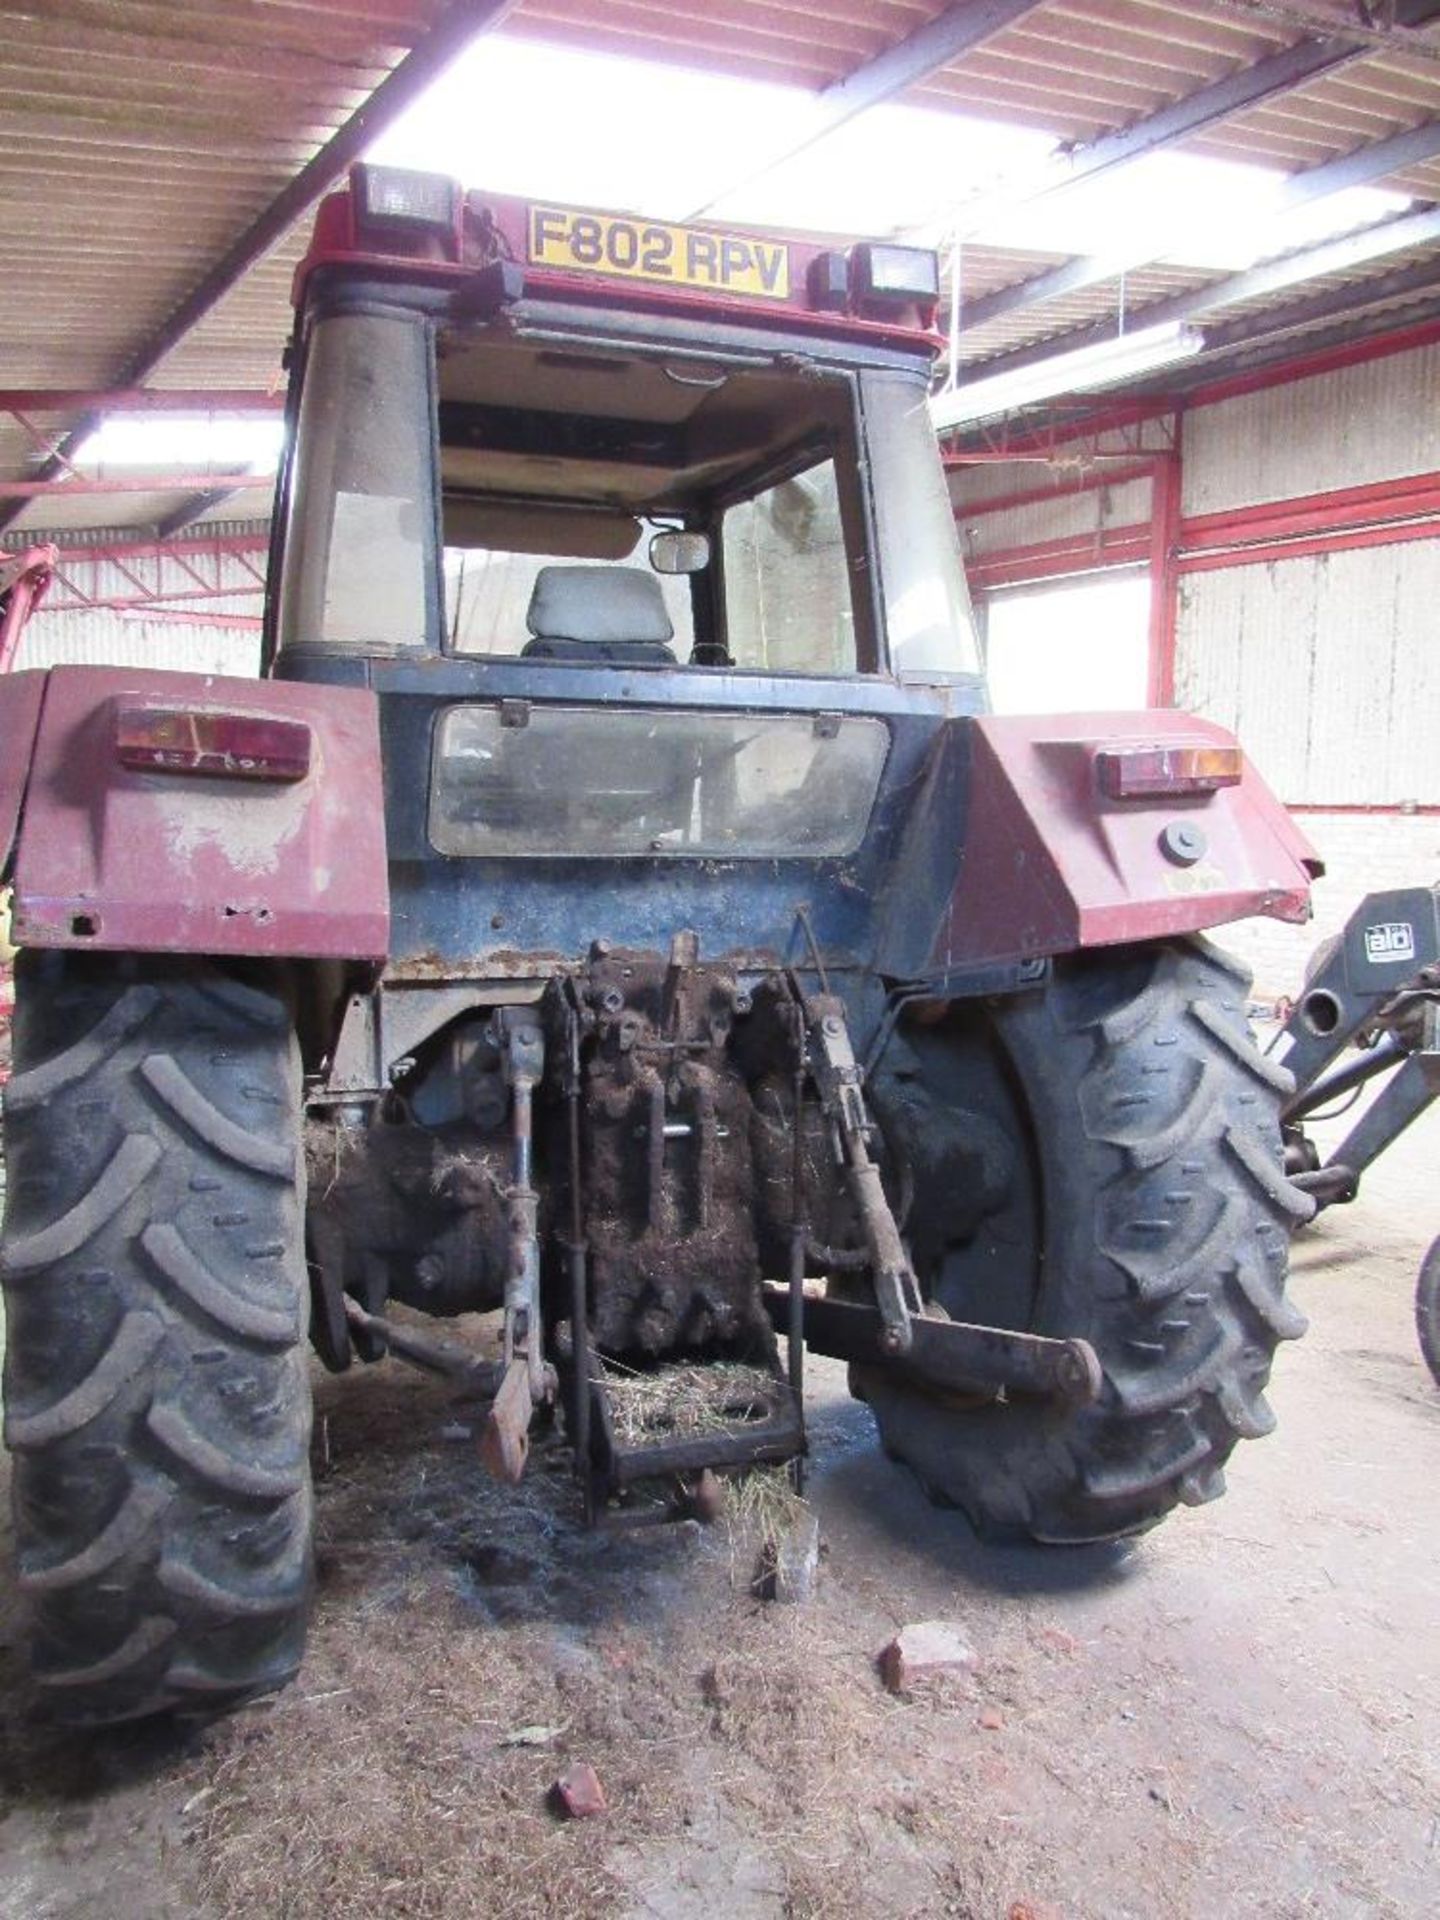 Case International Tractor 956XL, 4wd, Reg: F802 RPV, 5,700 hours, - Image 13 of 14